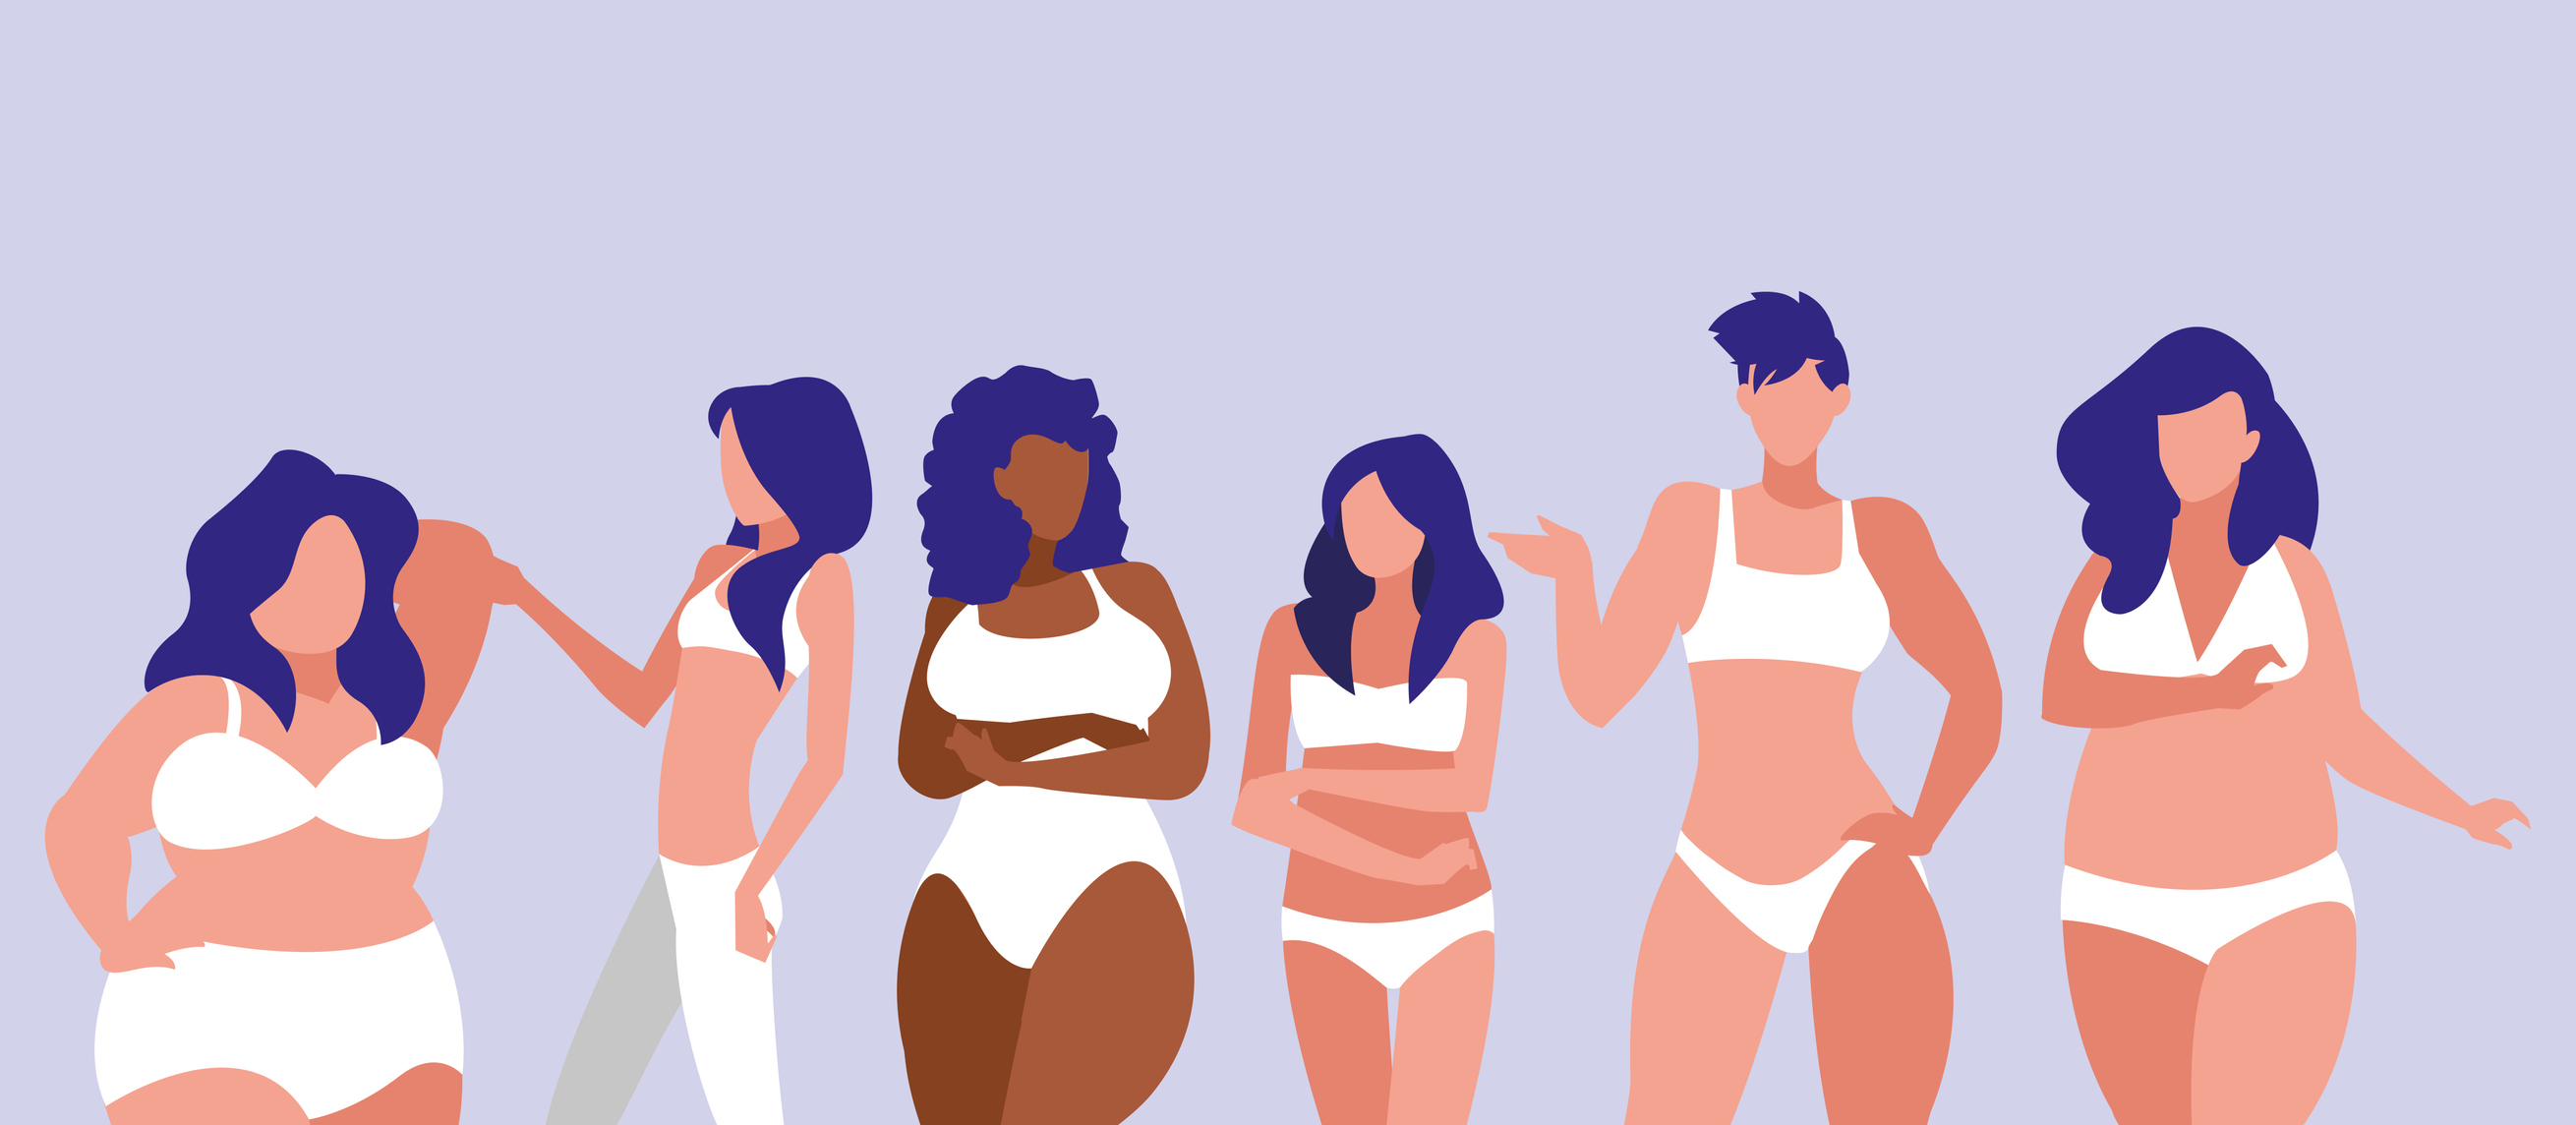 Illustration of women of different sizes and races modeling underwear